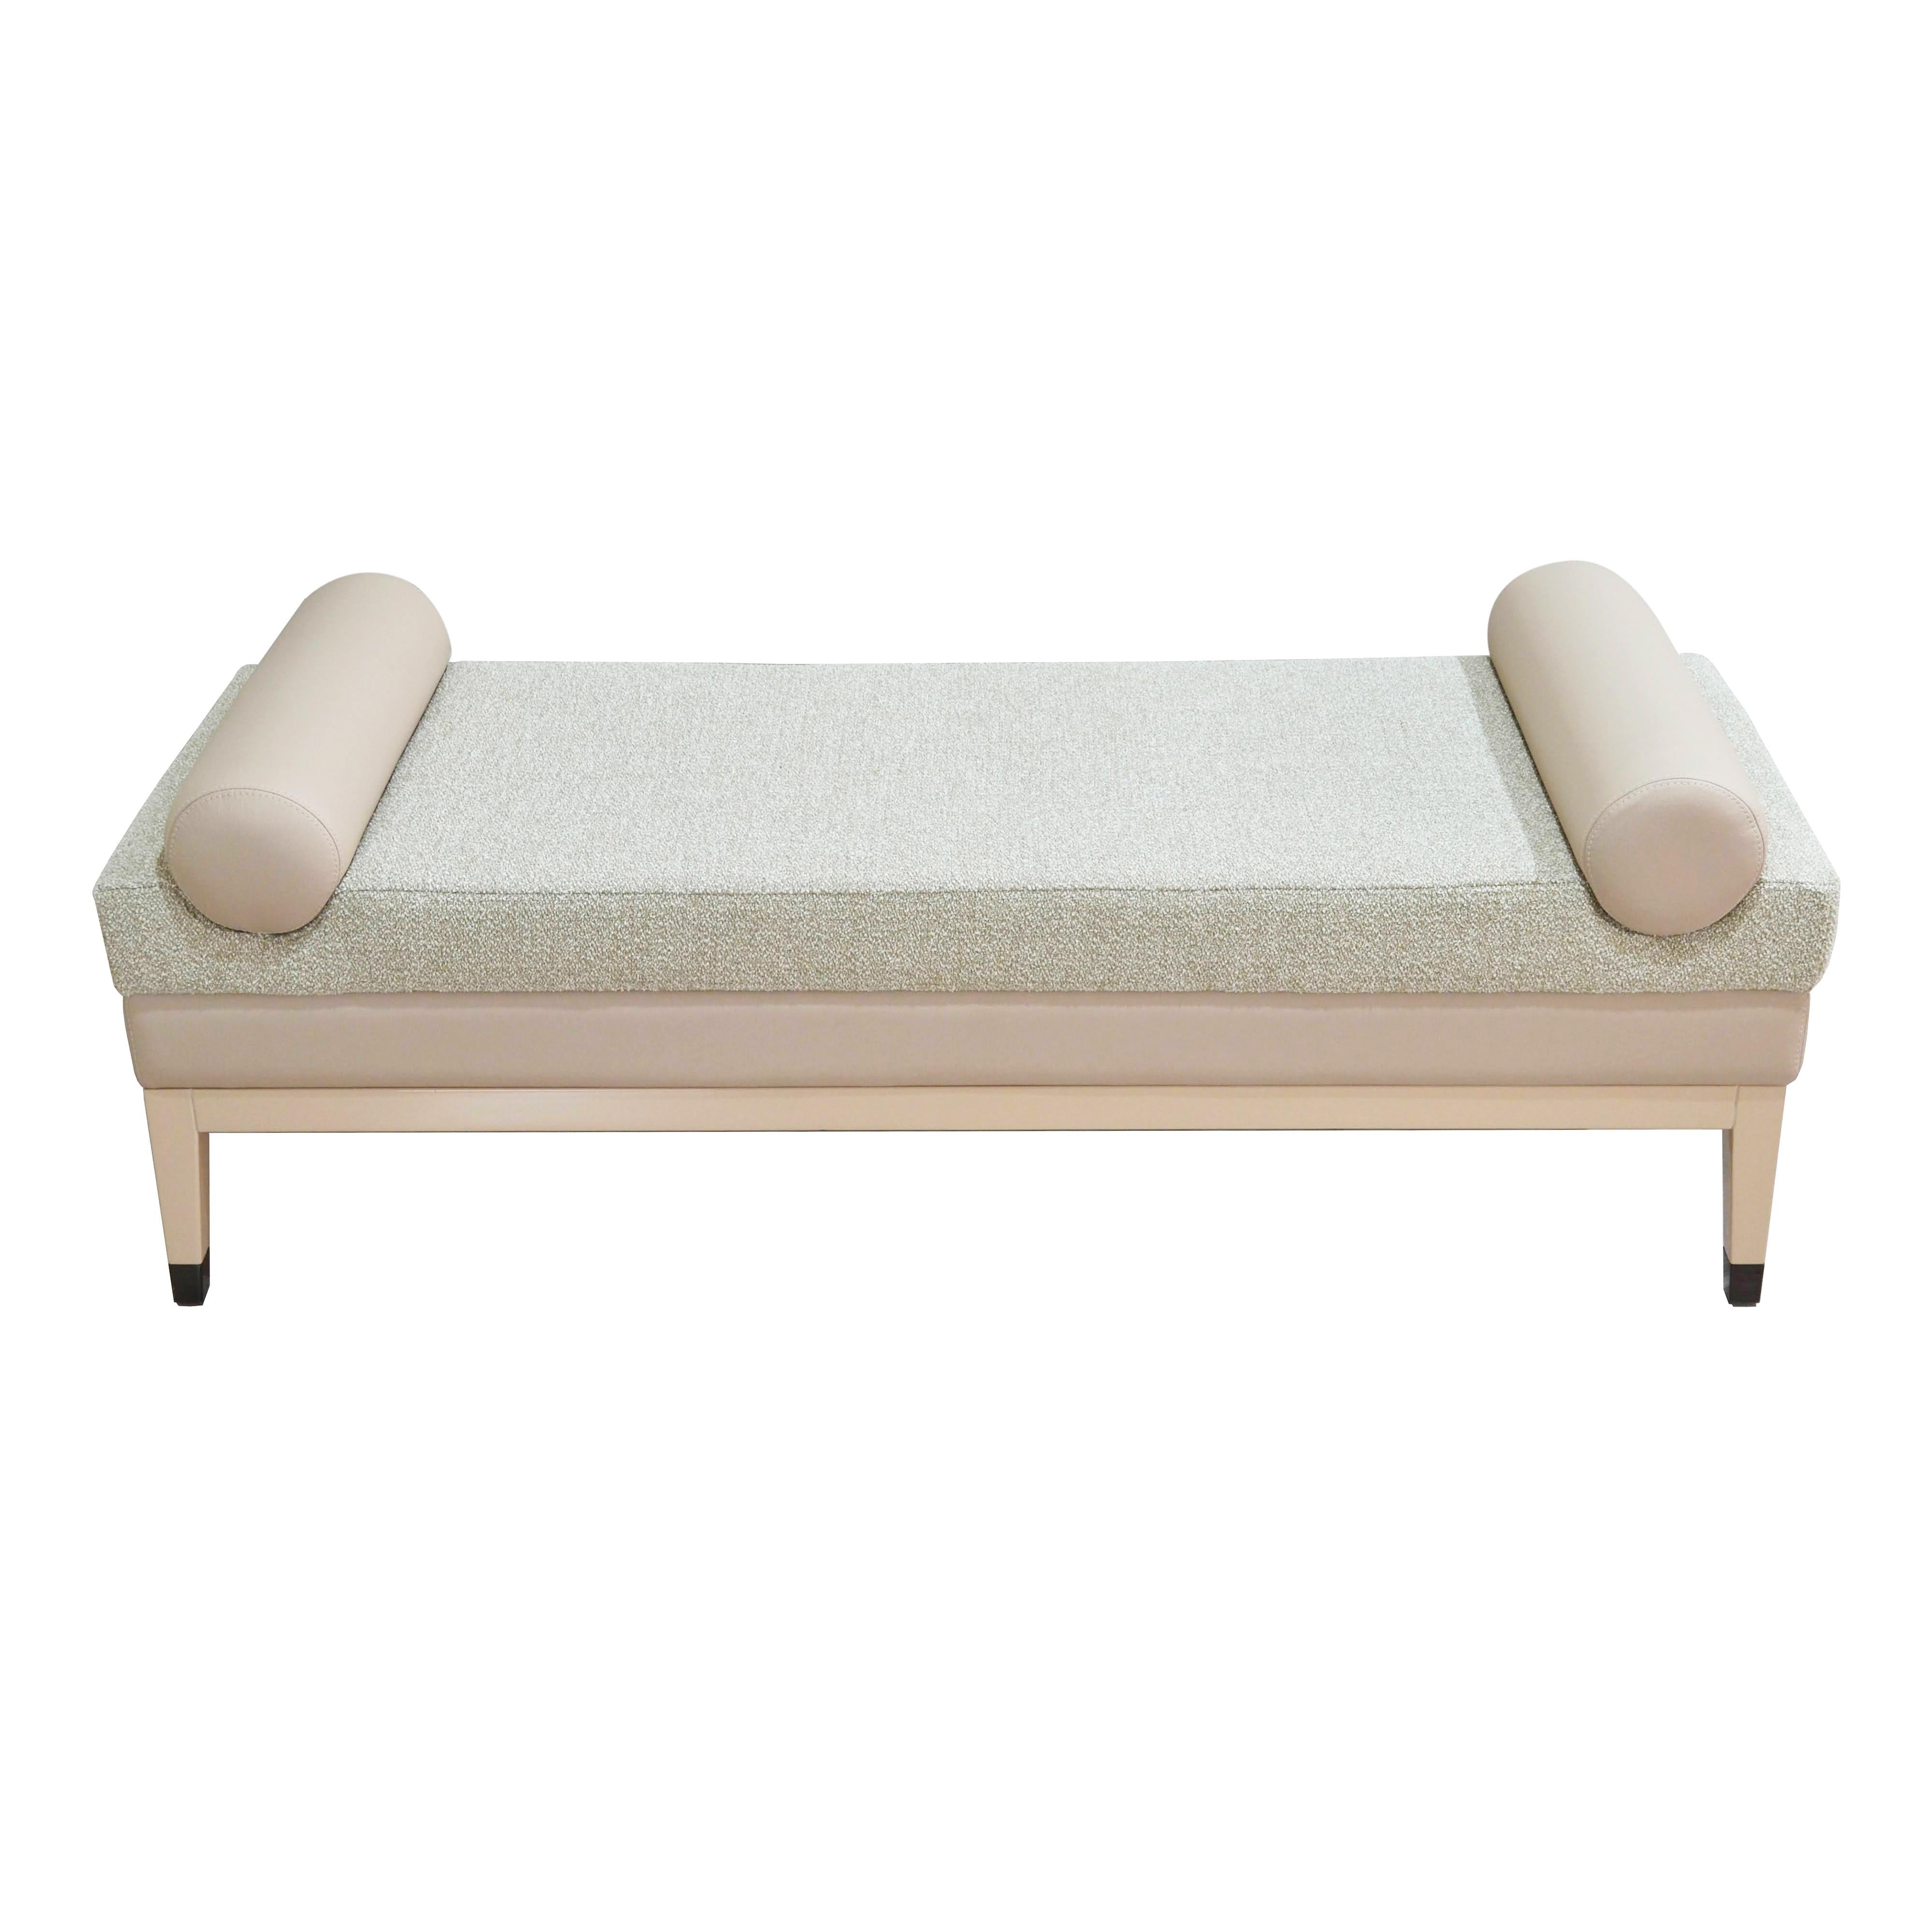 Art Deco Italian Contemporary Upholstered Bench in Quinoa Fabric and Beige Leather For Sale